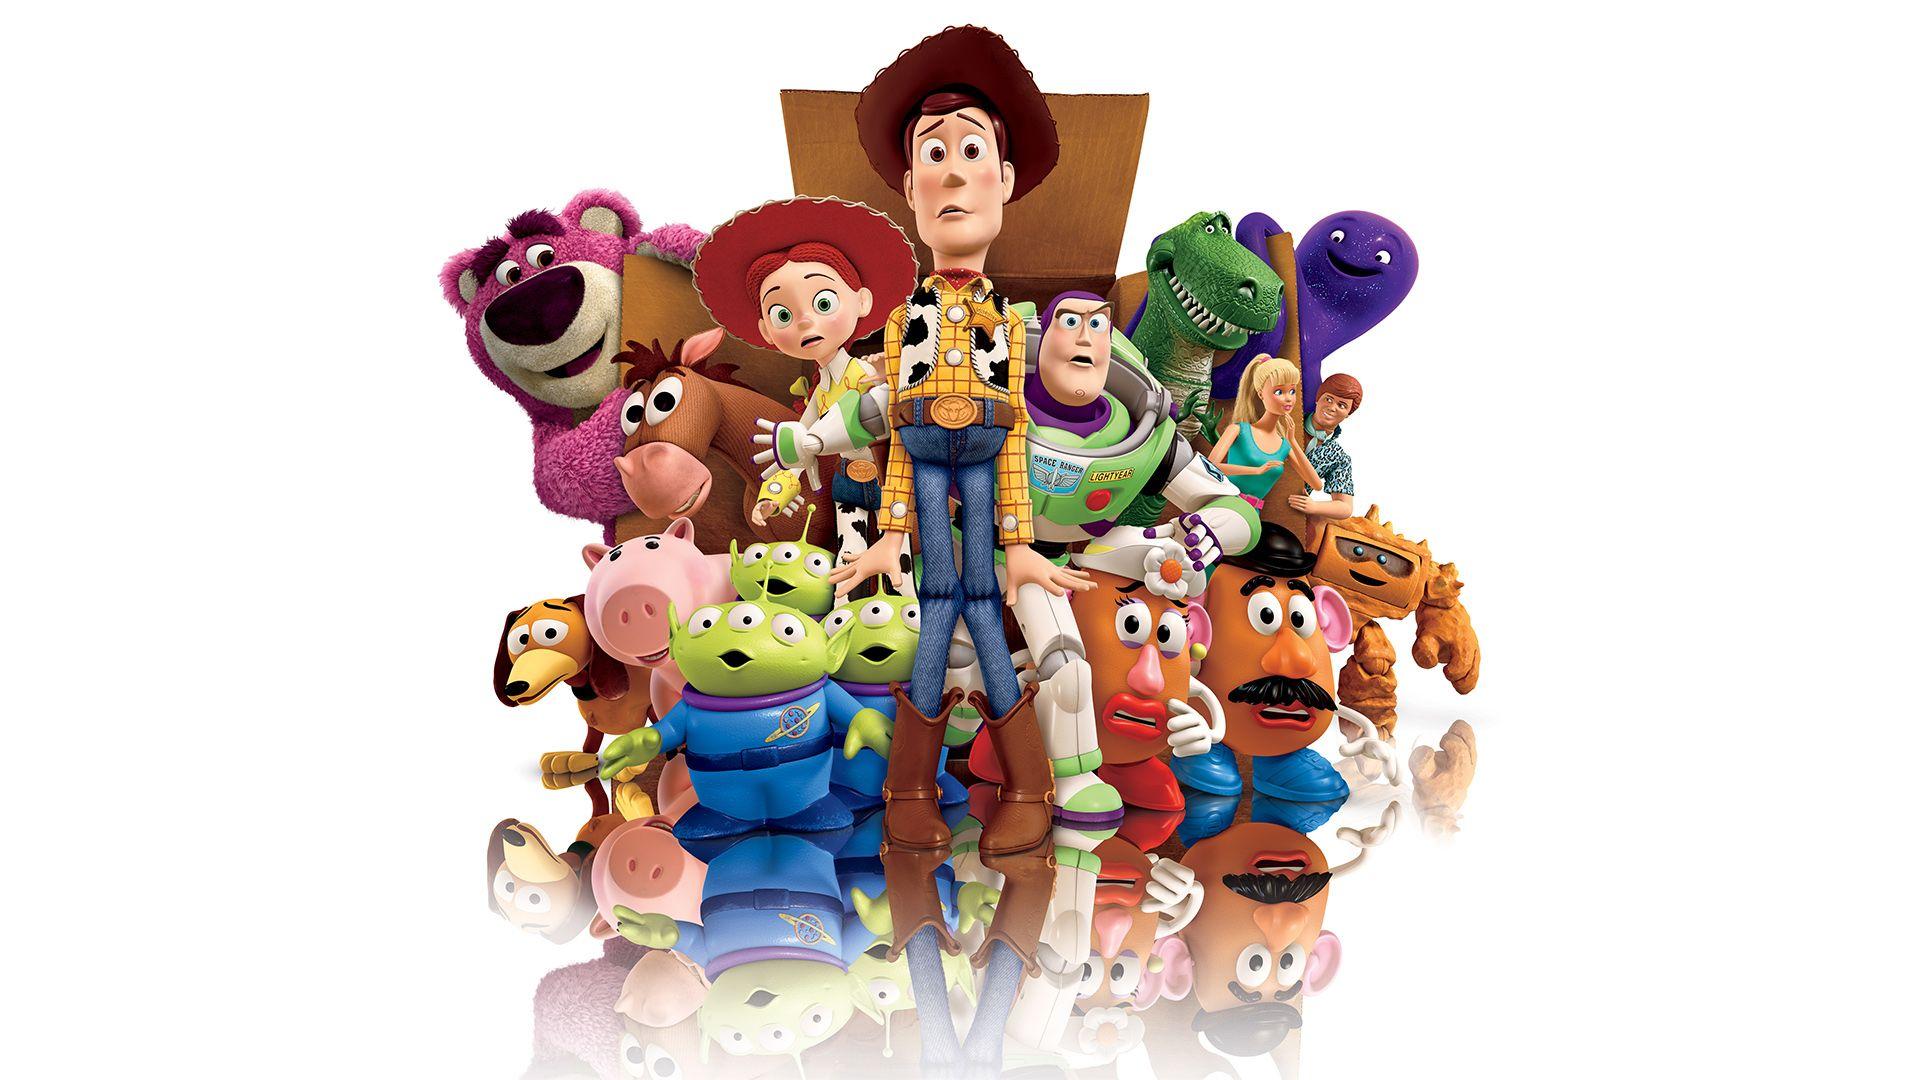 Toy Story 3 Wallpaper, Picture, Image